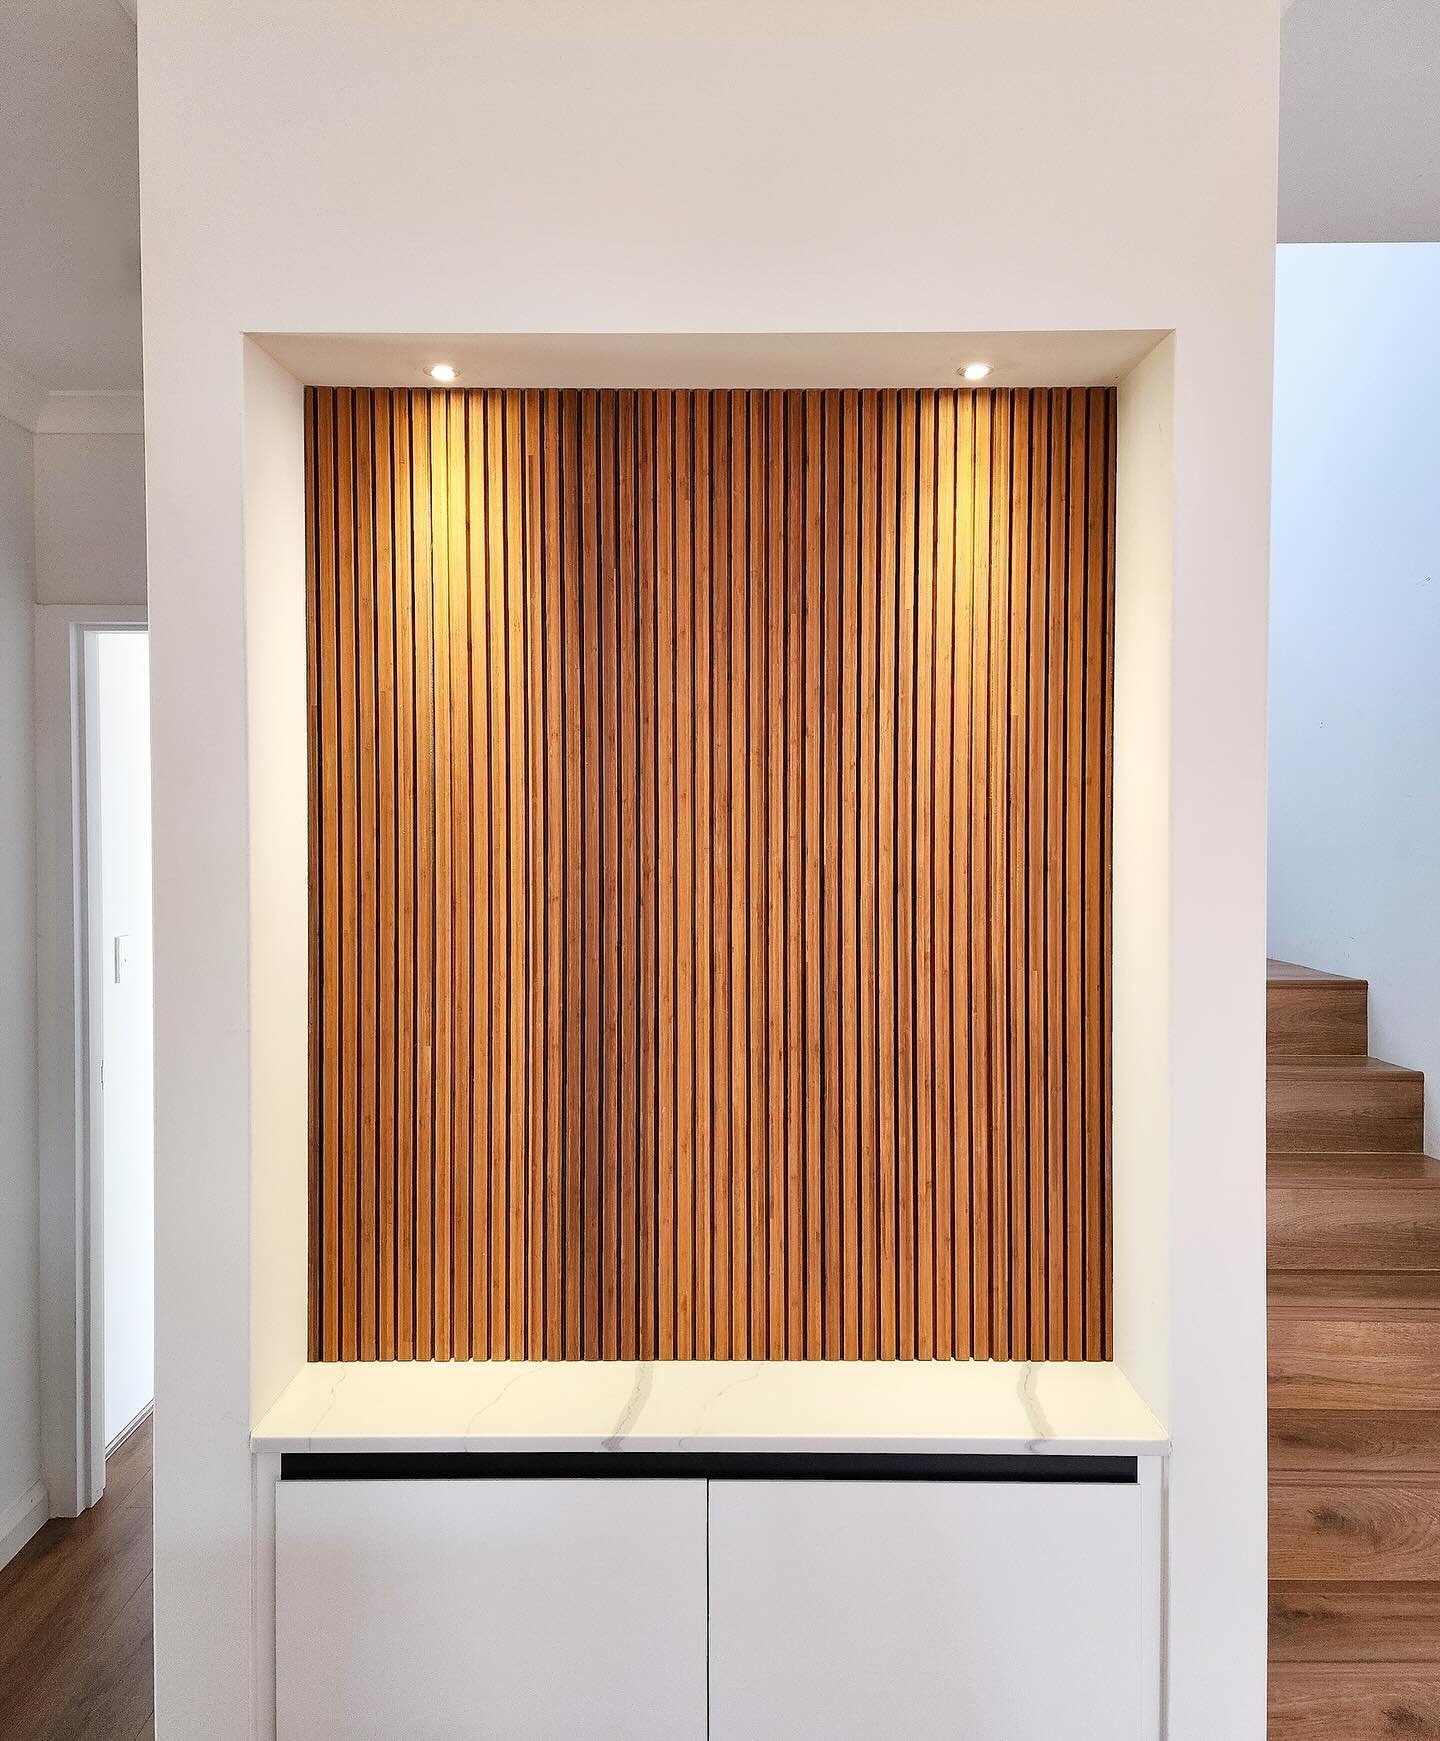 Got a little nook you want to turn into a focal point in your home? 

Our bamboo can help gives small space big impact 👊🏻 

Profile: Linear 6
Colour: Teak
Installer: @kayudesignco